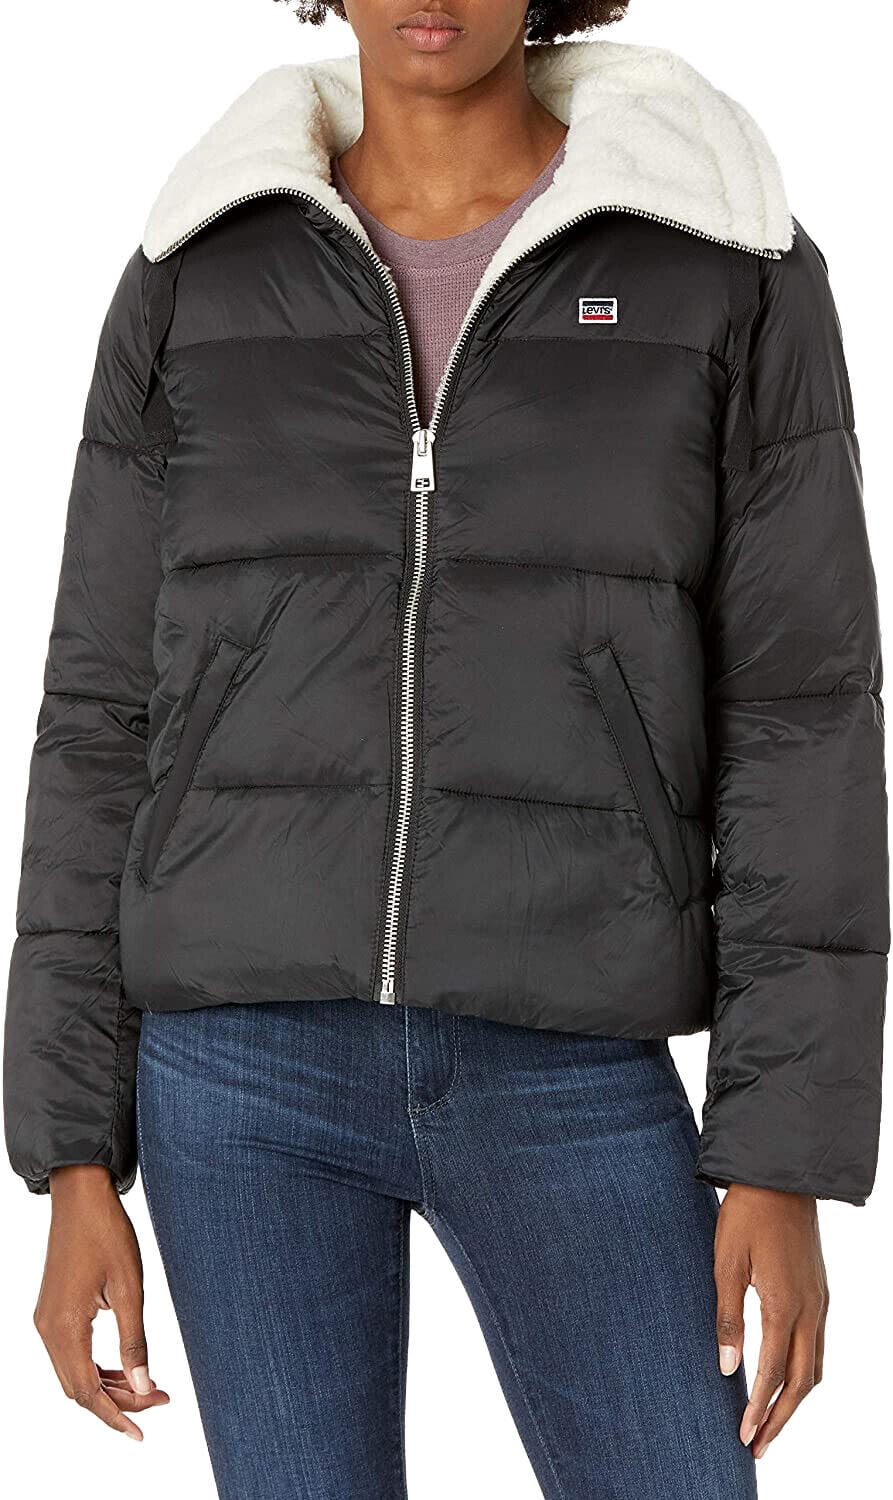 Levi's Women's Molly Sherpa Lined Puffer Jacket - Black - Large -  